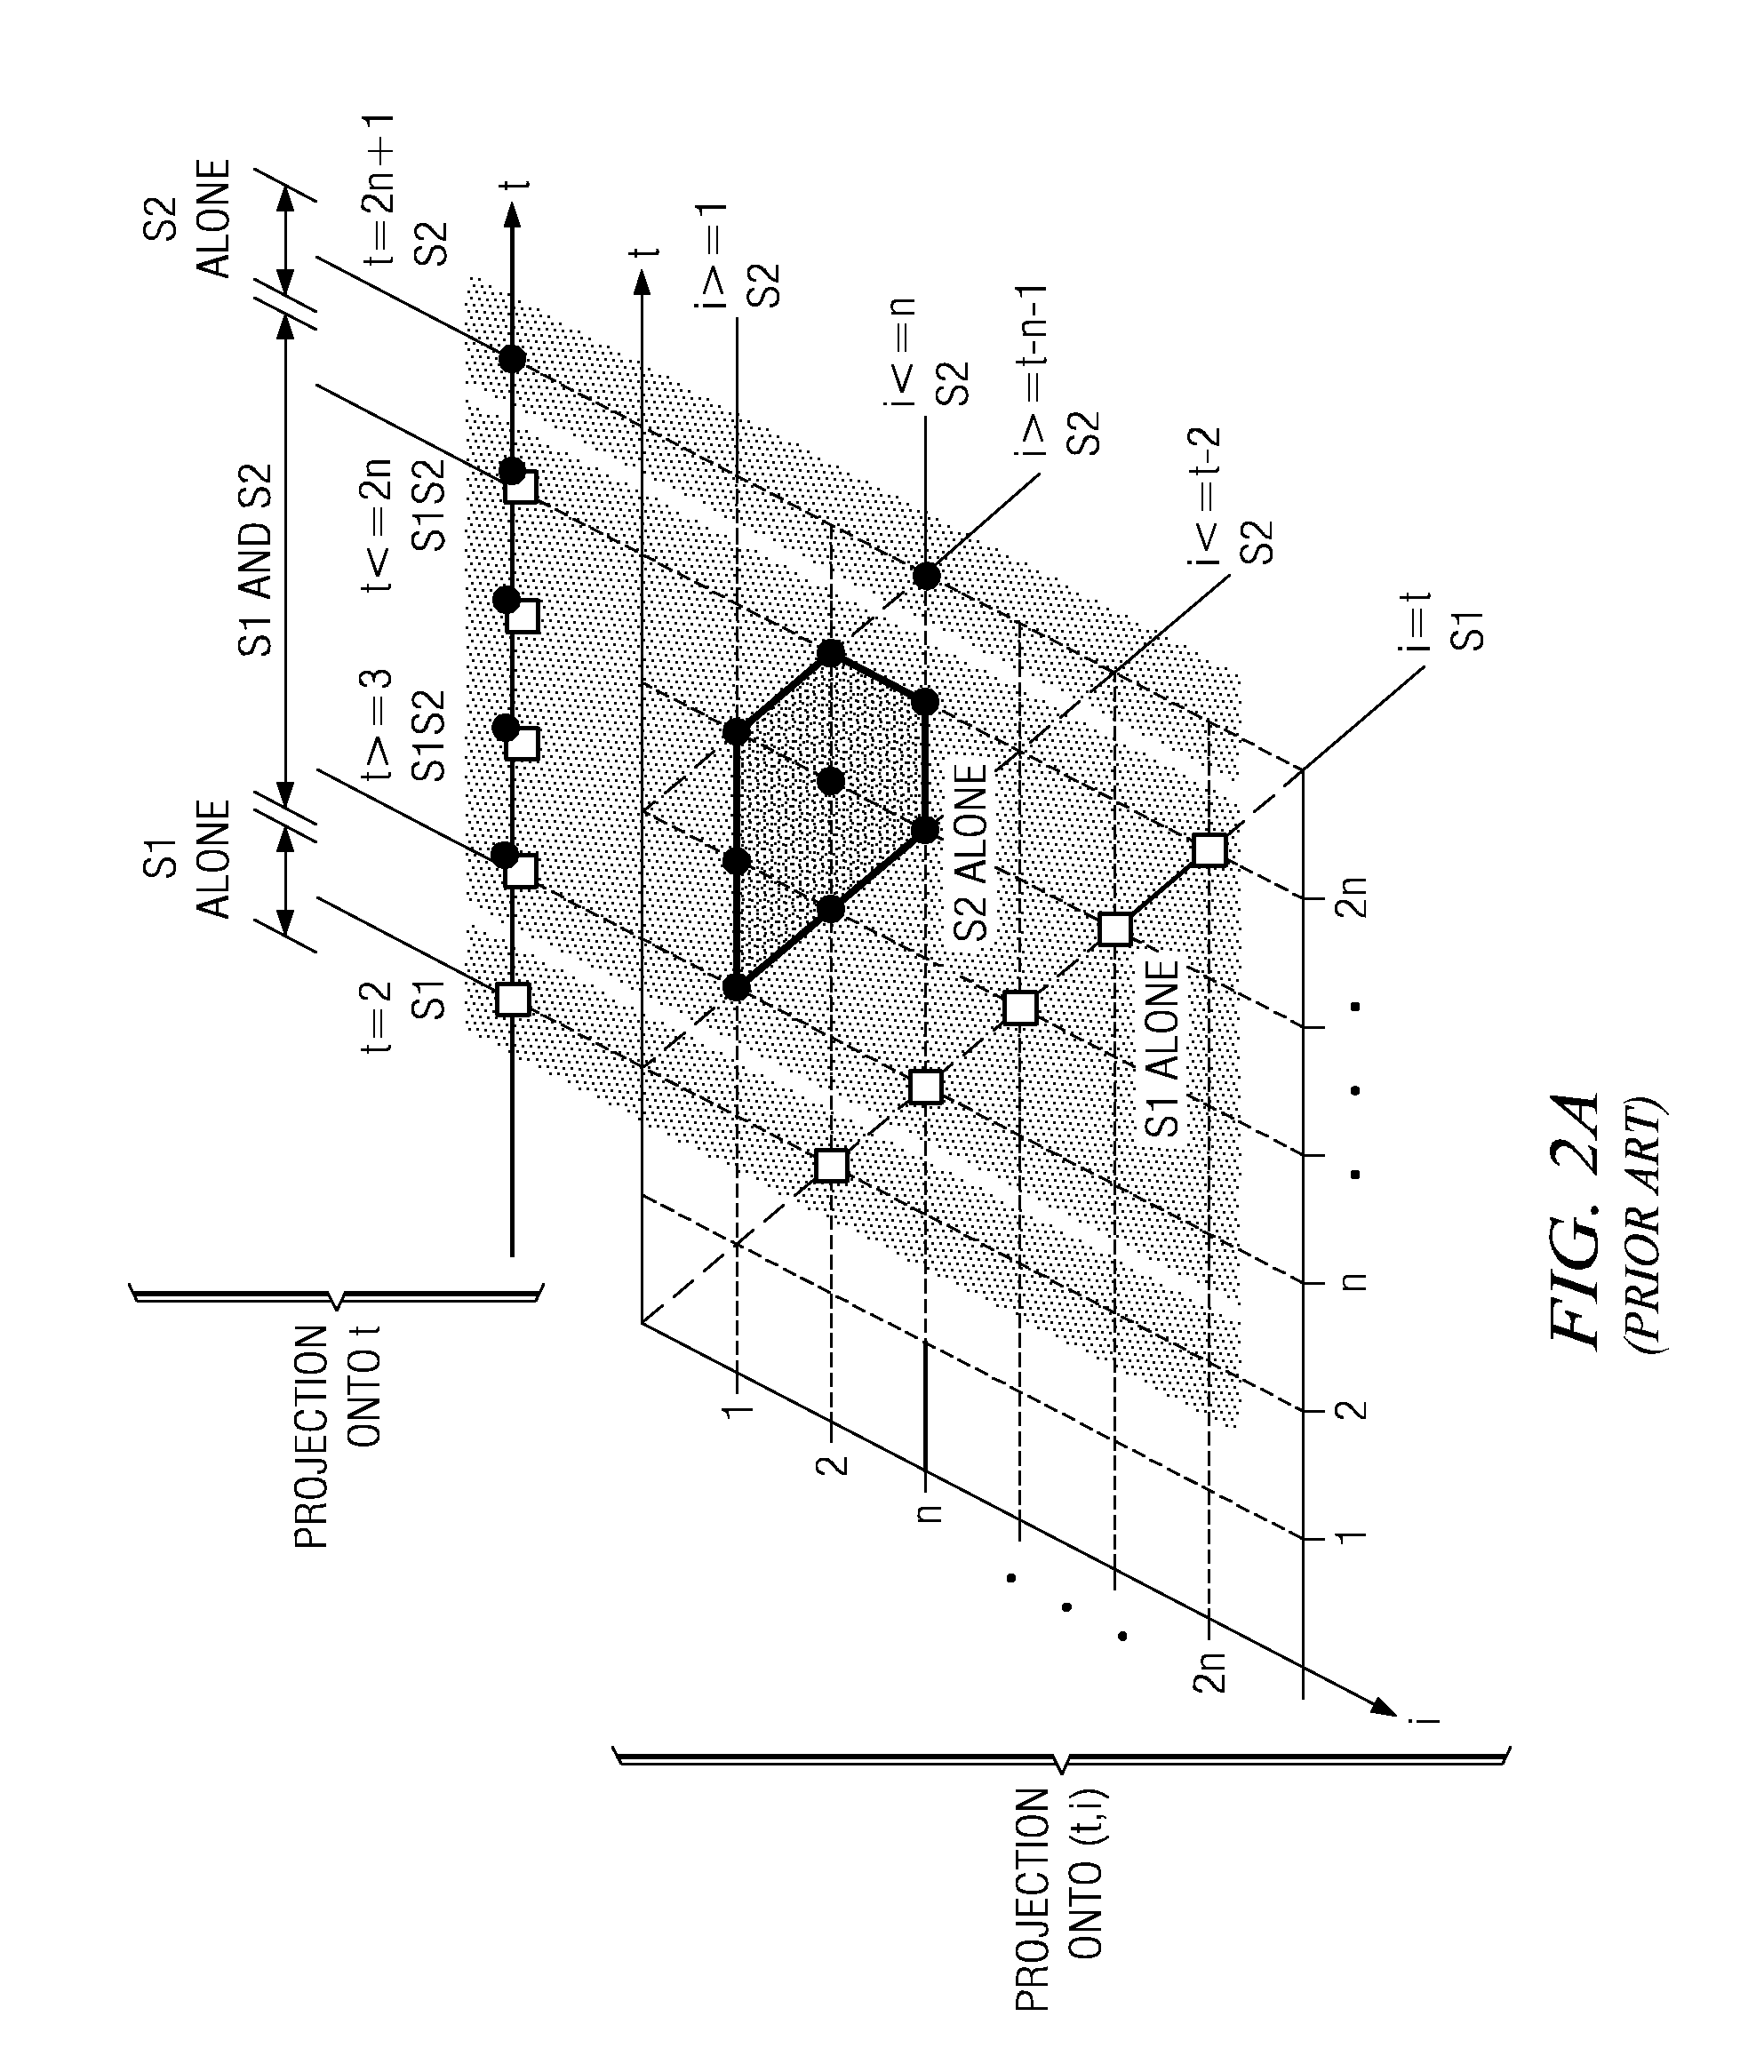 System and Method for Domain Stretching for an Advanced Dual-Representation Polyhedral Loop Transformation Framework